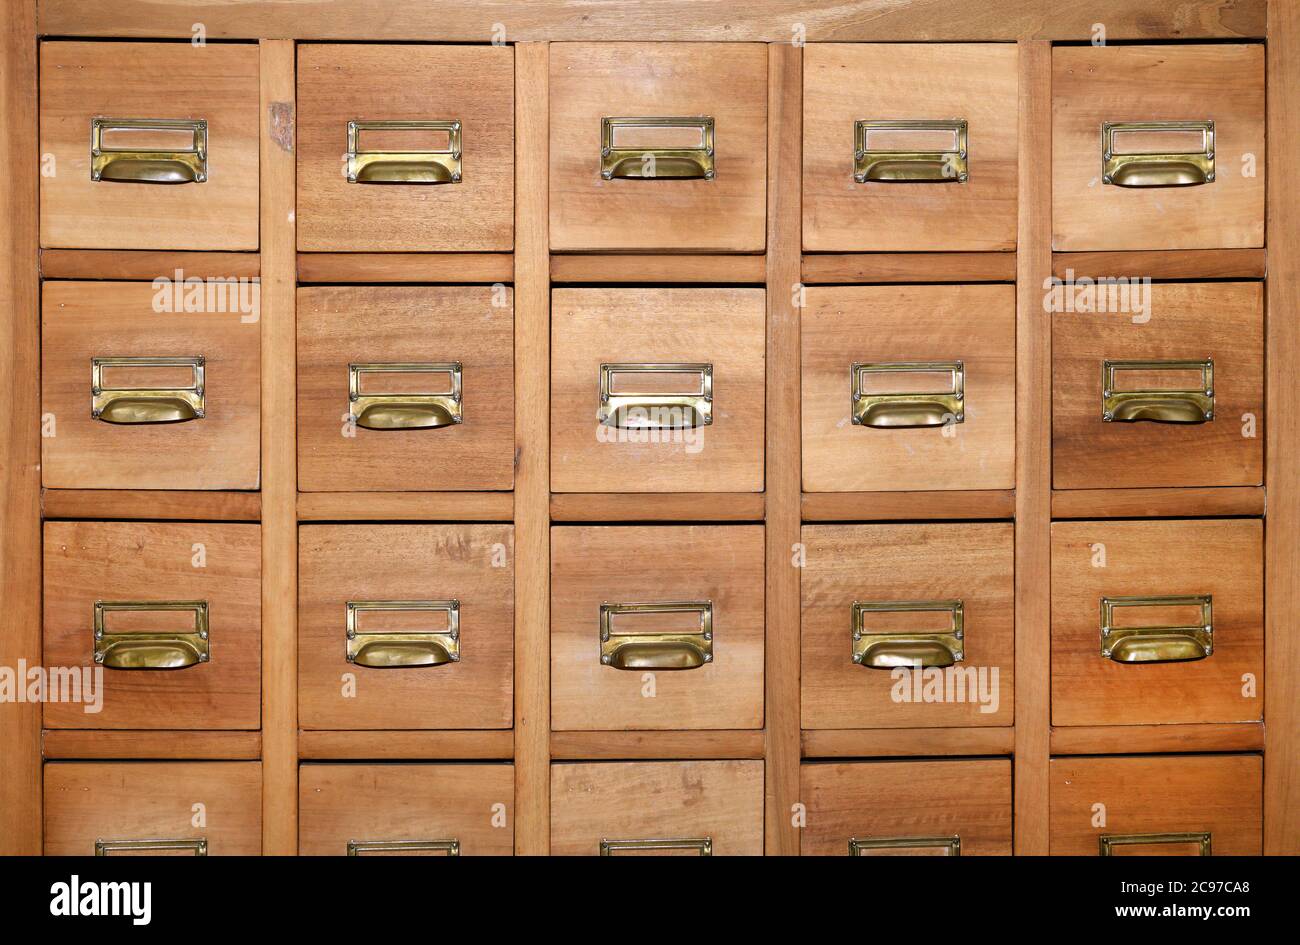 Cabinet with rows of small wooden drawers with brass handles and label holders in a symmetrical full frame background view Stock Photo